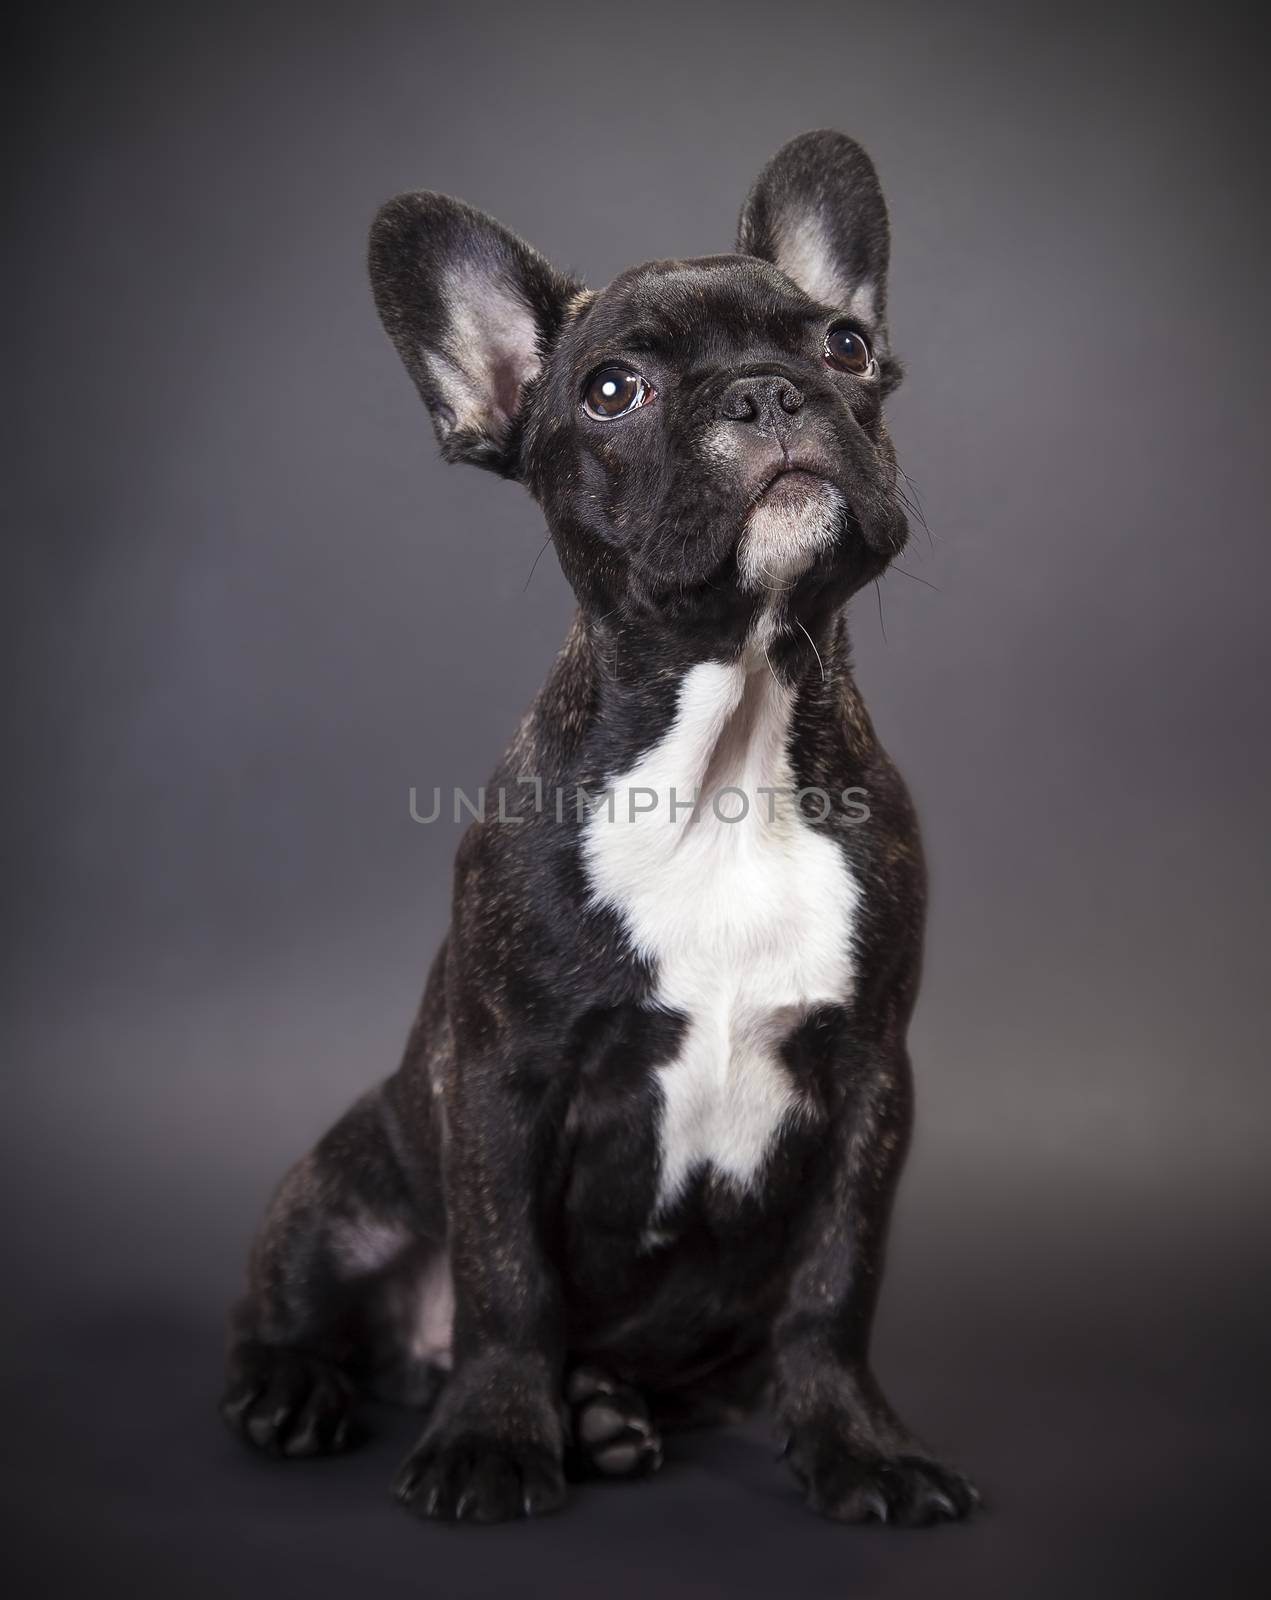  pppy french bulldog  by MegaArt